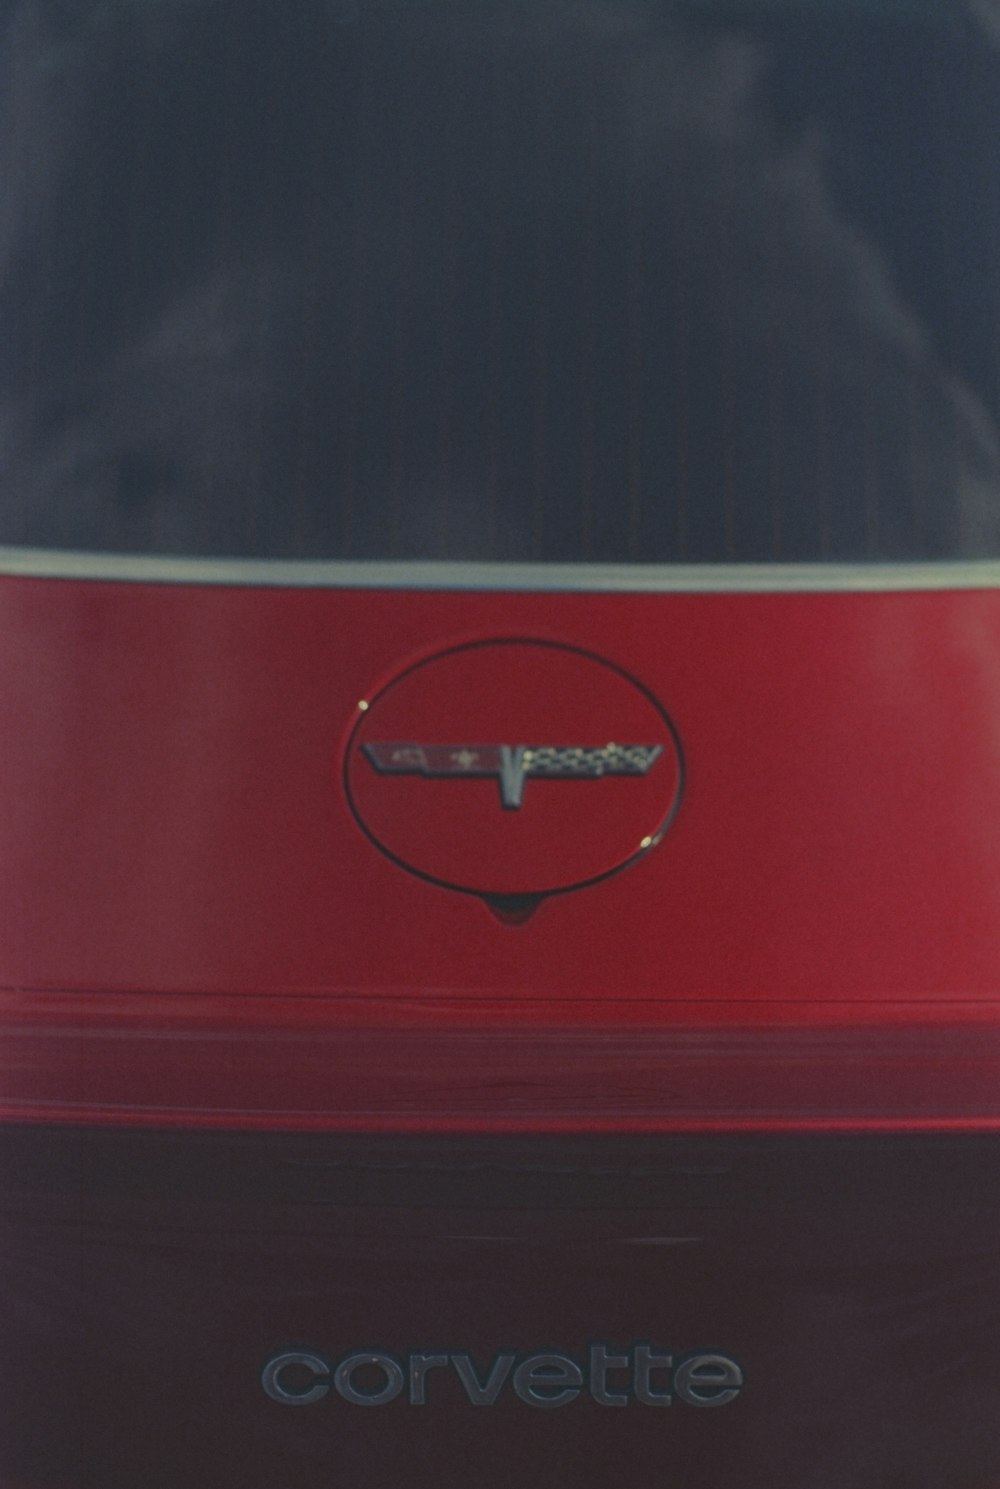 a red rectangular object with a black circle on it